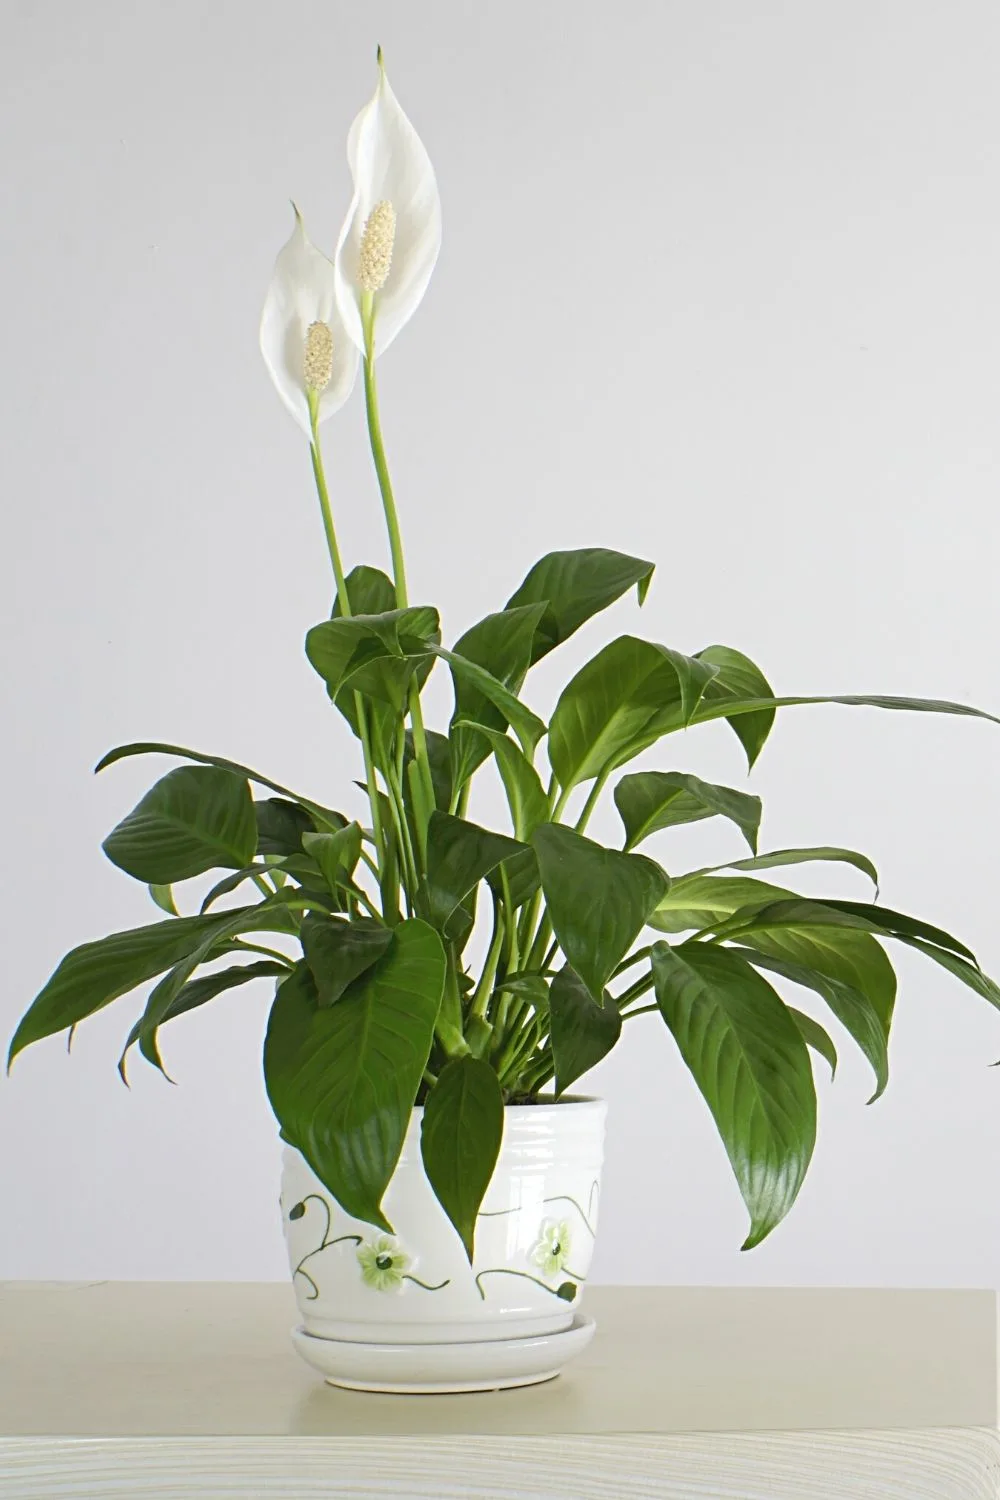 Peace Lily is a delicate plant that requires using lukewarm water to submerge its roots into